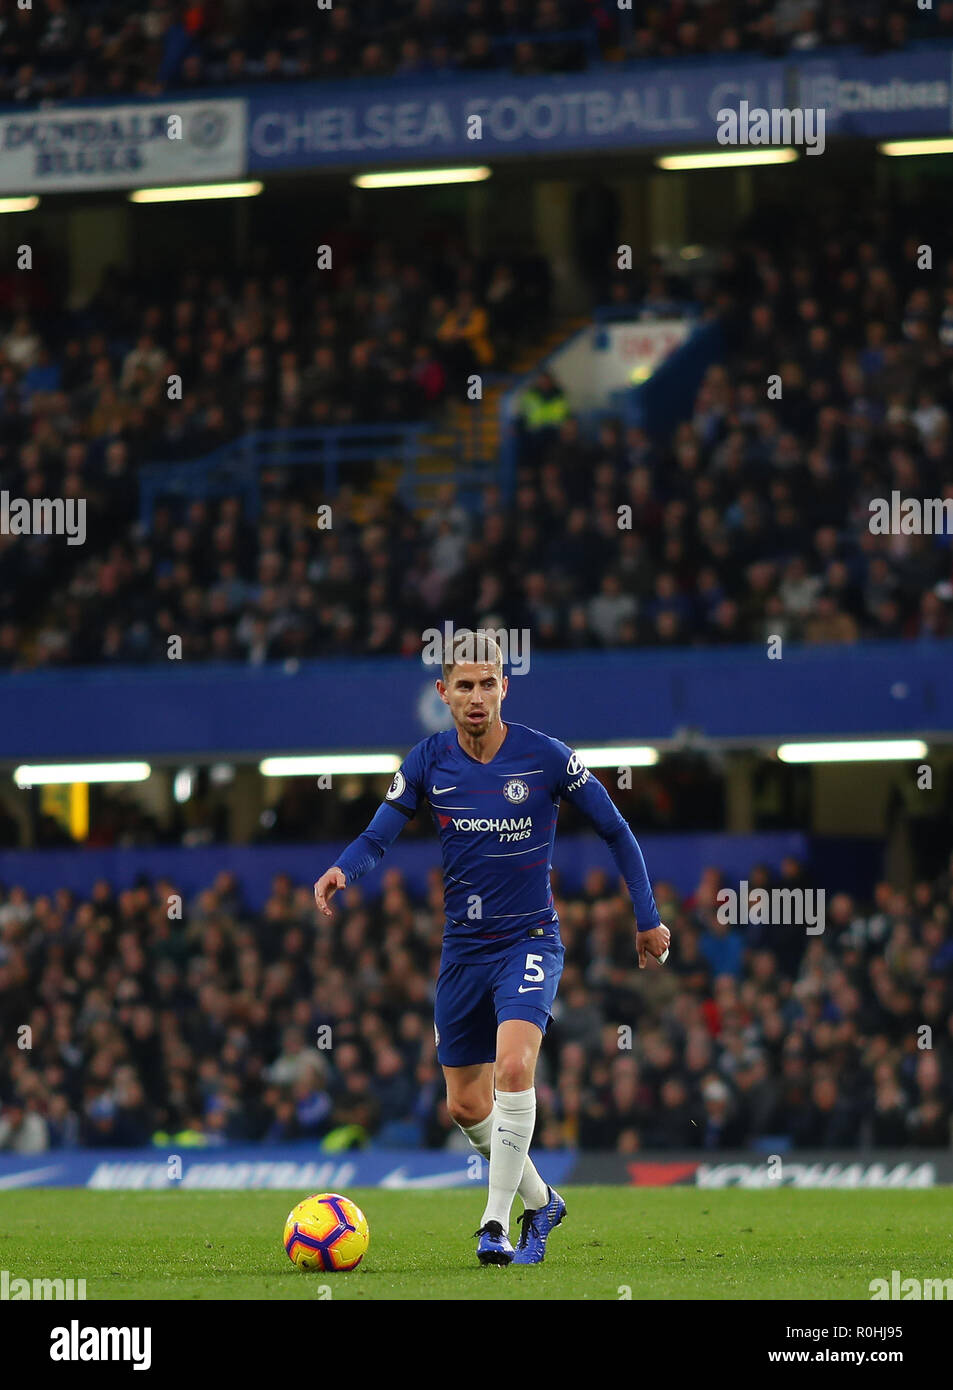 Jorginho of Chelsea - Chelsea v Crystal Palace, Premier League, Stamford Bridge, London - 4th November 2018  STRICTLY EDITORIAL USE ONLY - DataCo rules apply - The use of this image in a commercial context is strictly prohibited unless express permission has been given by the club(s) concerned. Examples of commercial usage include, but are not limited to, use in betting and gaming, marketing and advertising products. No use with unauthorised audio, video, data, fixture lists, club and or league logos or services including those listed as 'live' Stock Photo